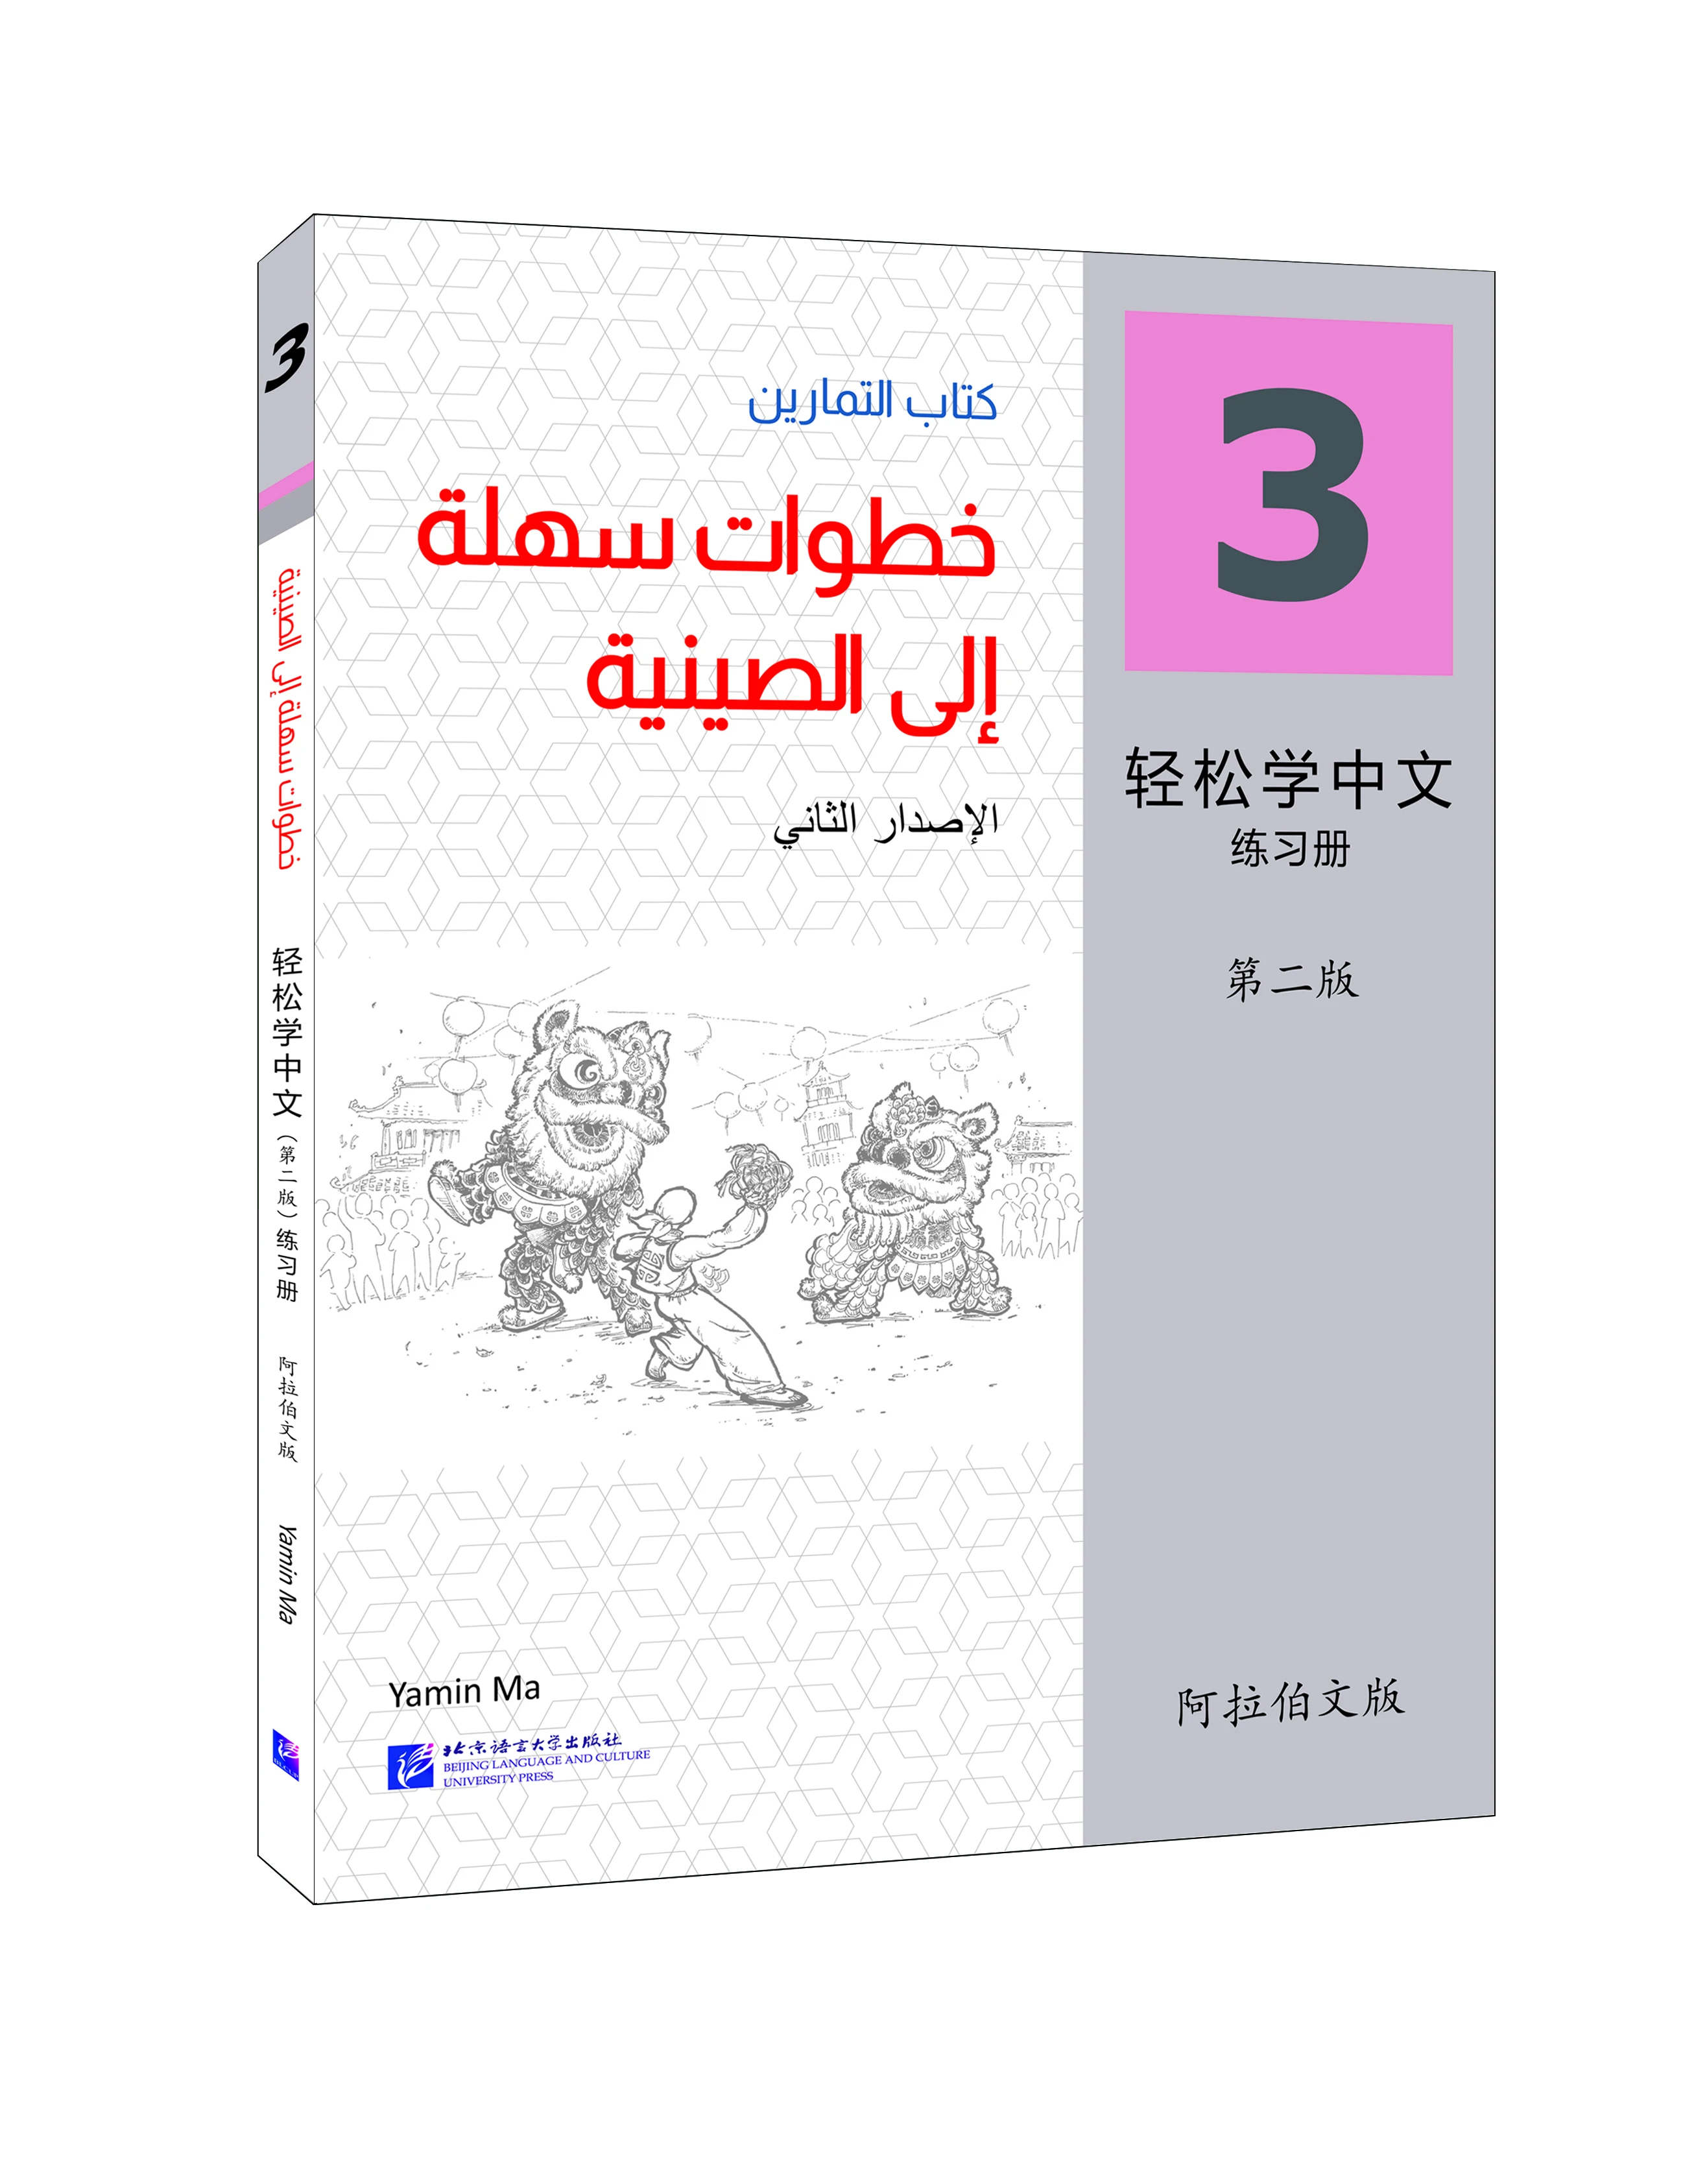 

Easy Steps To Chinese (2nd Edition) (Arabic Edition)Workbook 3 Chinese Learning Book Mandarin